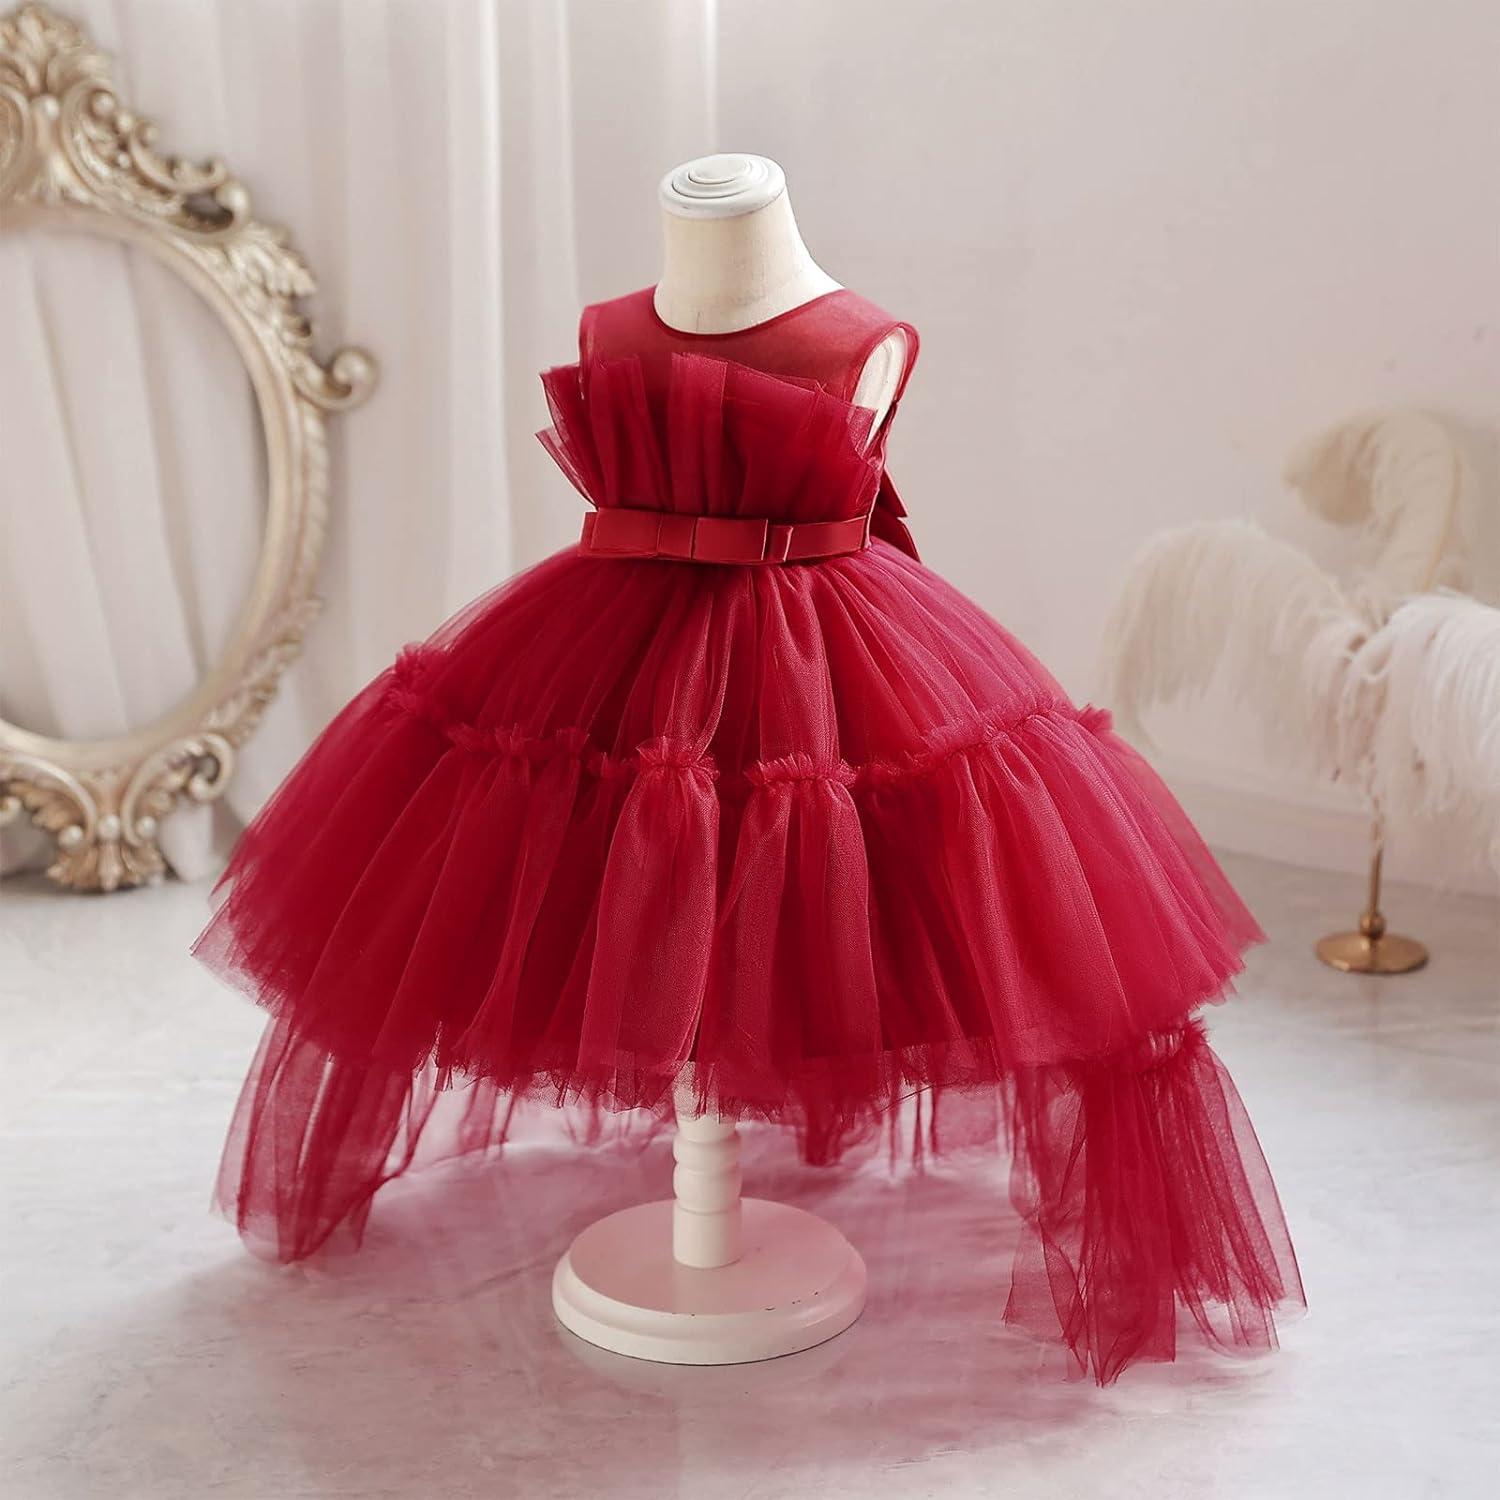 Baby Dresses For Infant Birthday Party, Christmas & Christening Baby Girl  Baby Dress In Sizes 3 24 Months From Qiugenhaitang, $12.36 | DHgate.Com